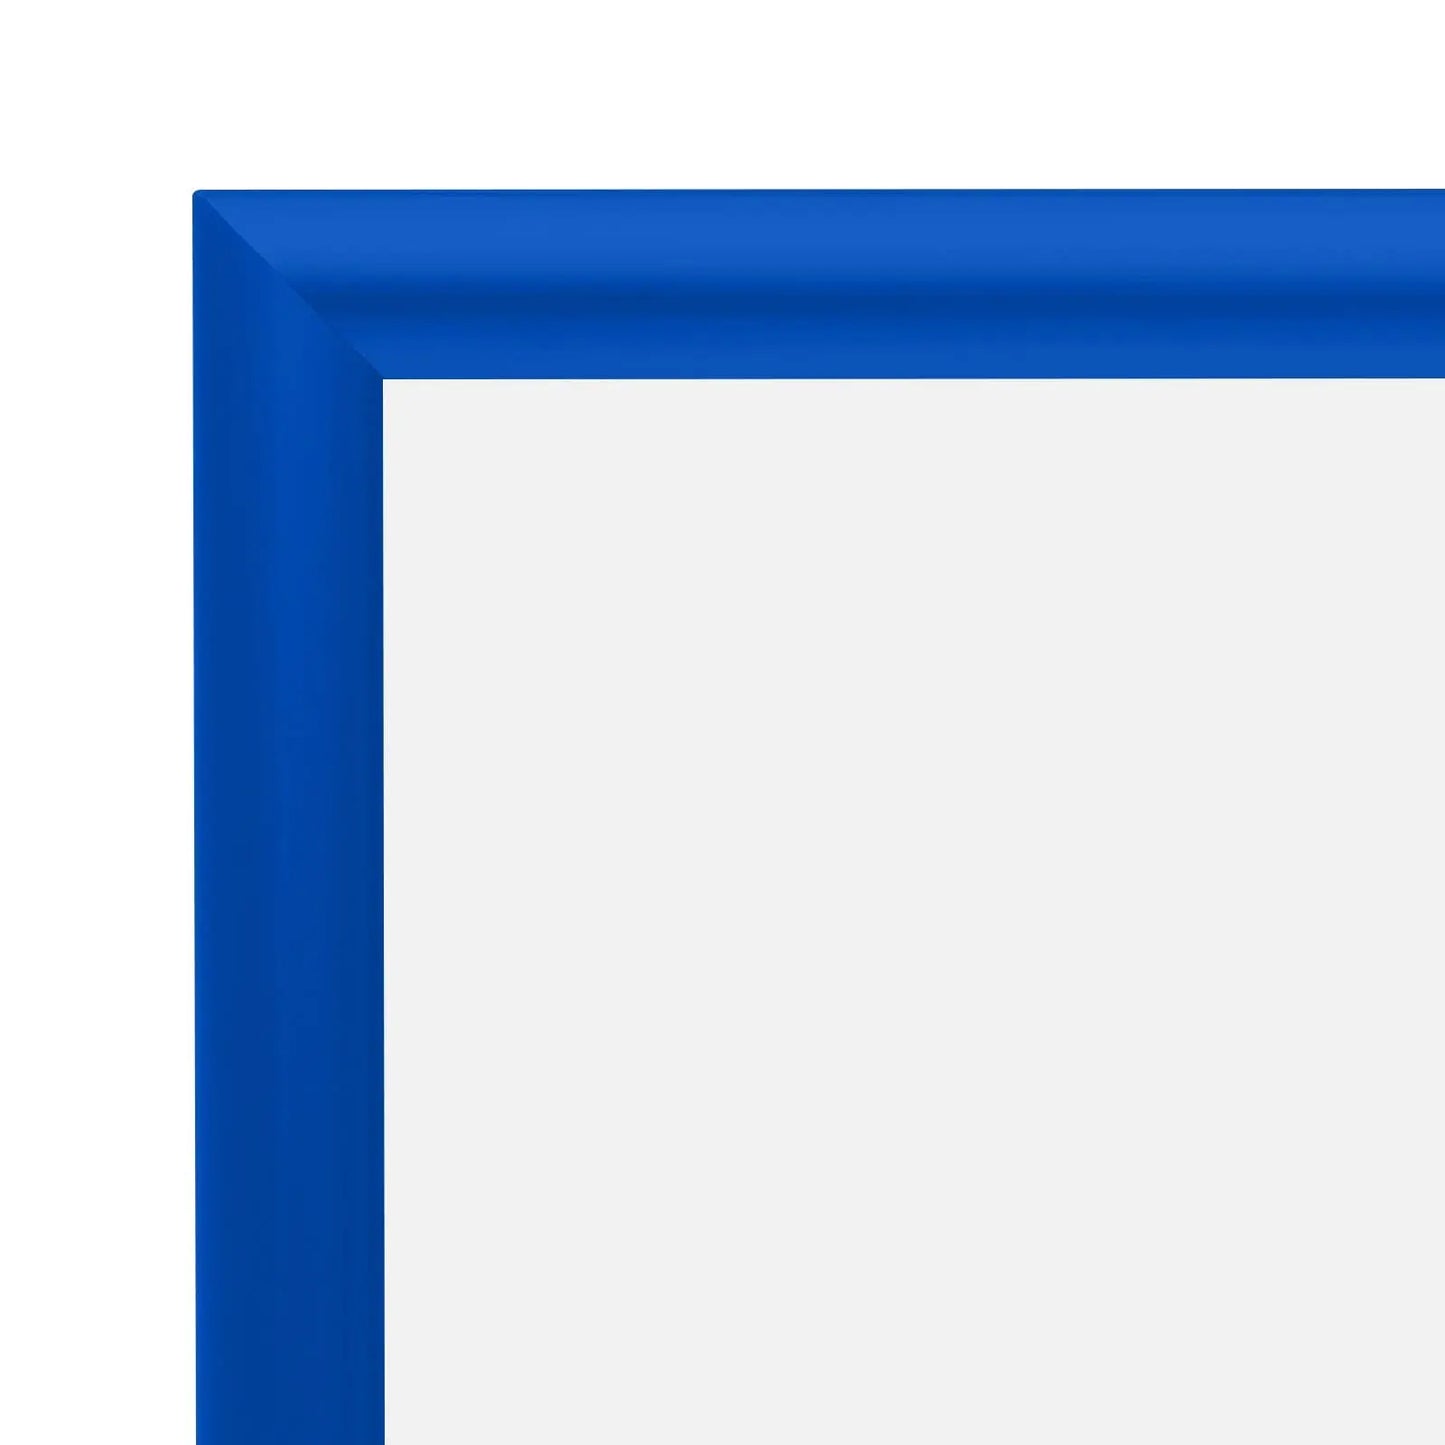 11x17 Blue SnapeZo® Snap Frame - 1" Profile - Snap Frames Direct